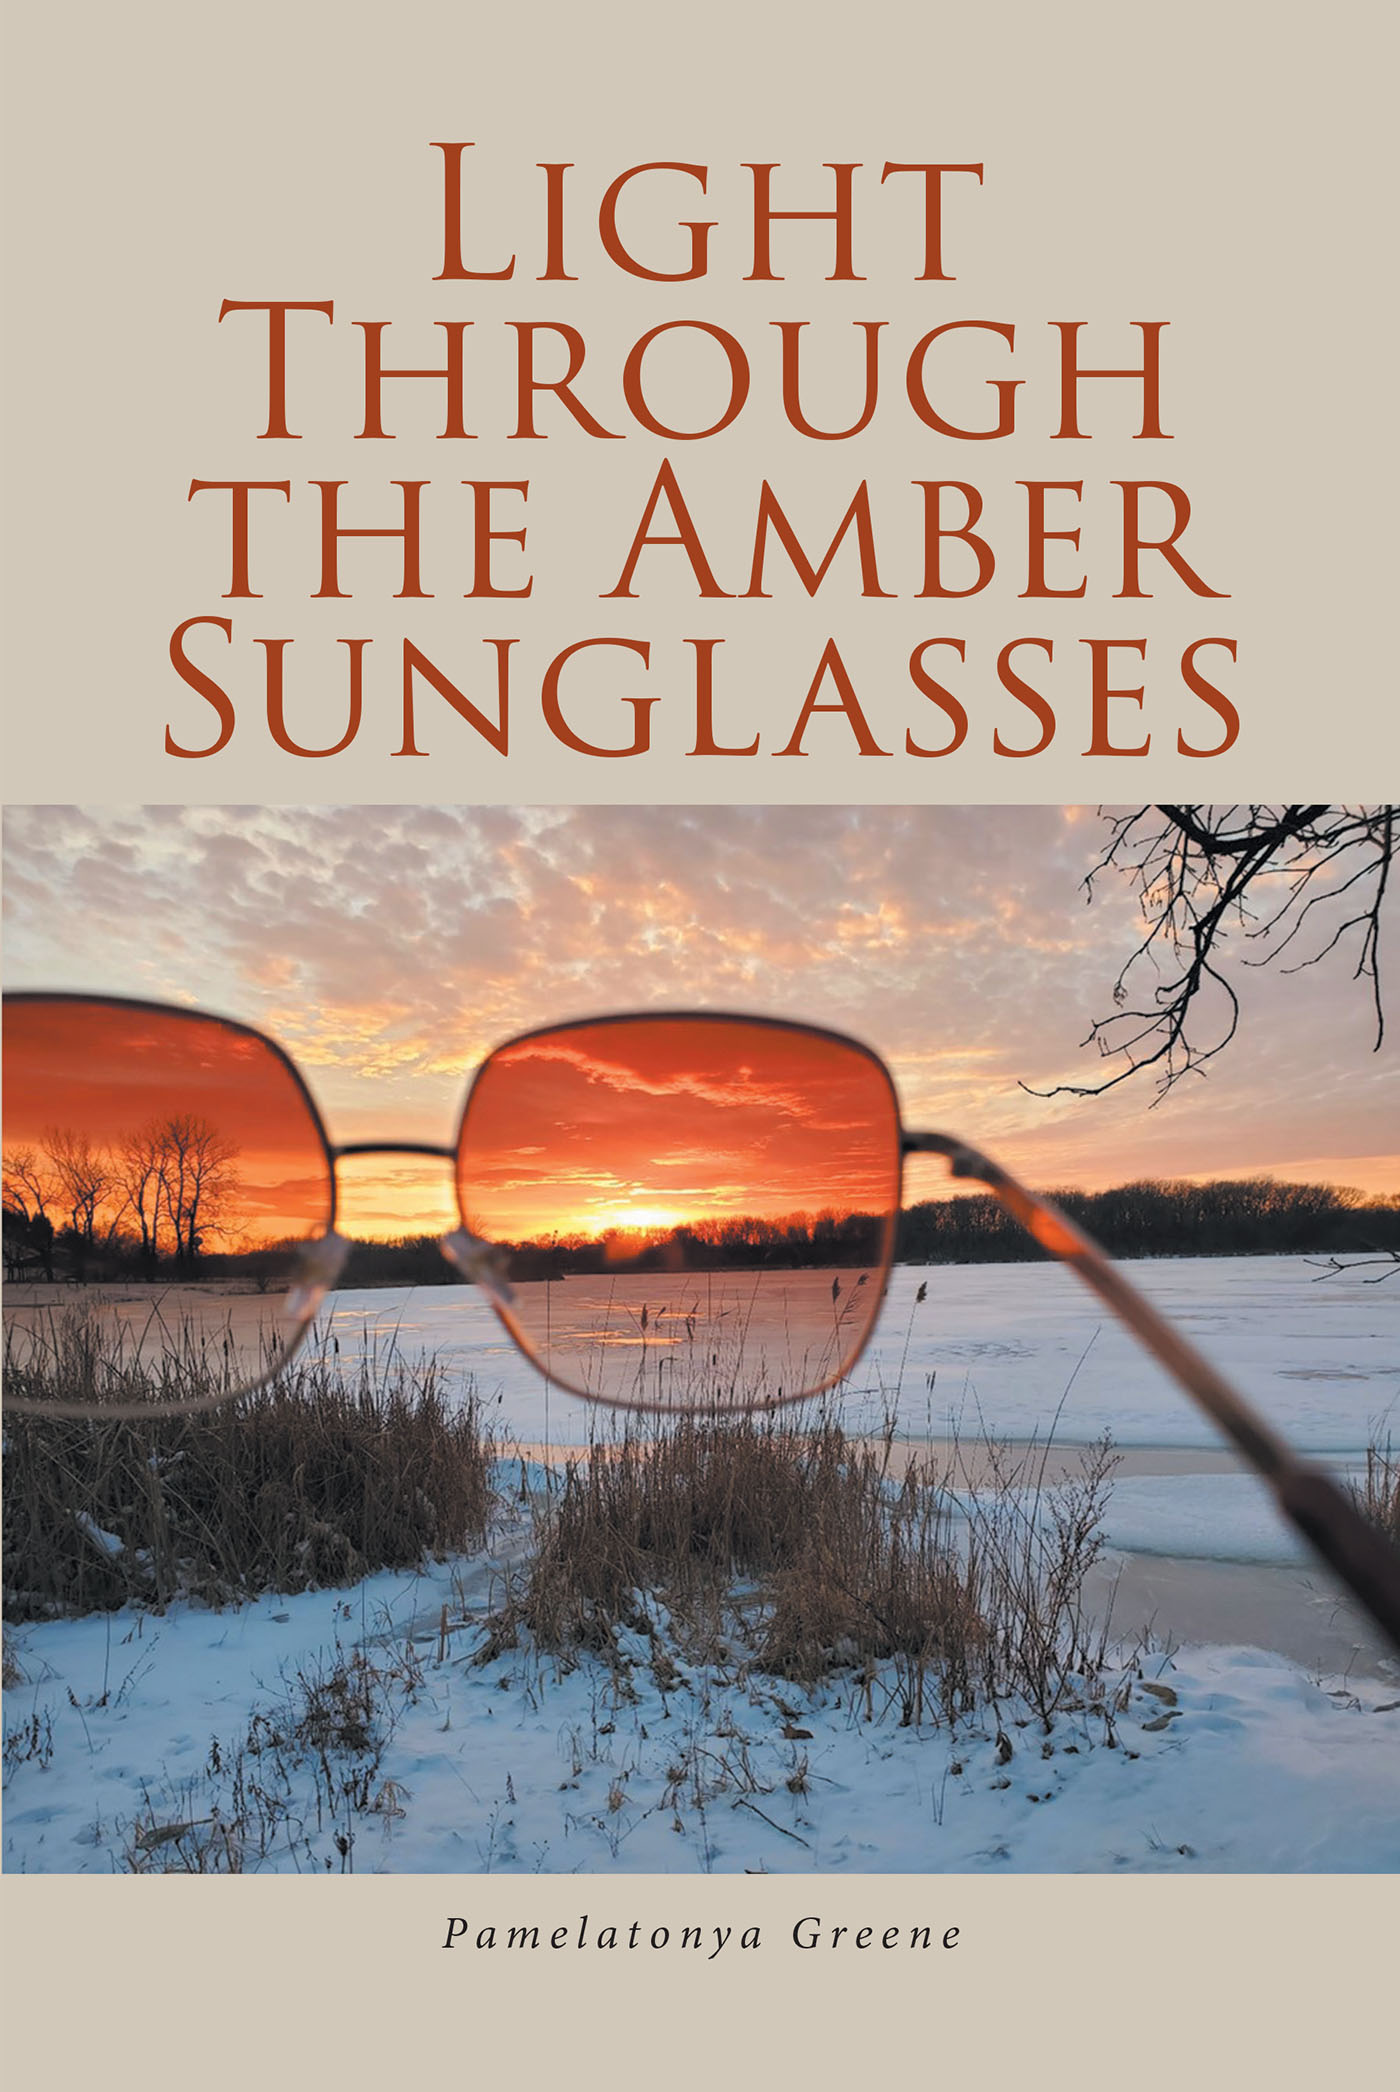 Pamelatonya Greene’s Newly Released "Light Through the Amber Sunglasses" is a Powerful Reminder of God’s Constant Grace